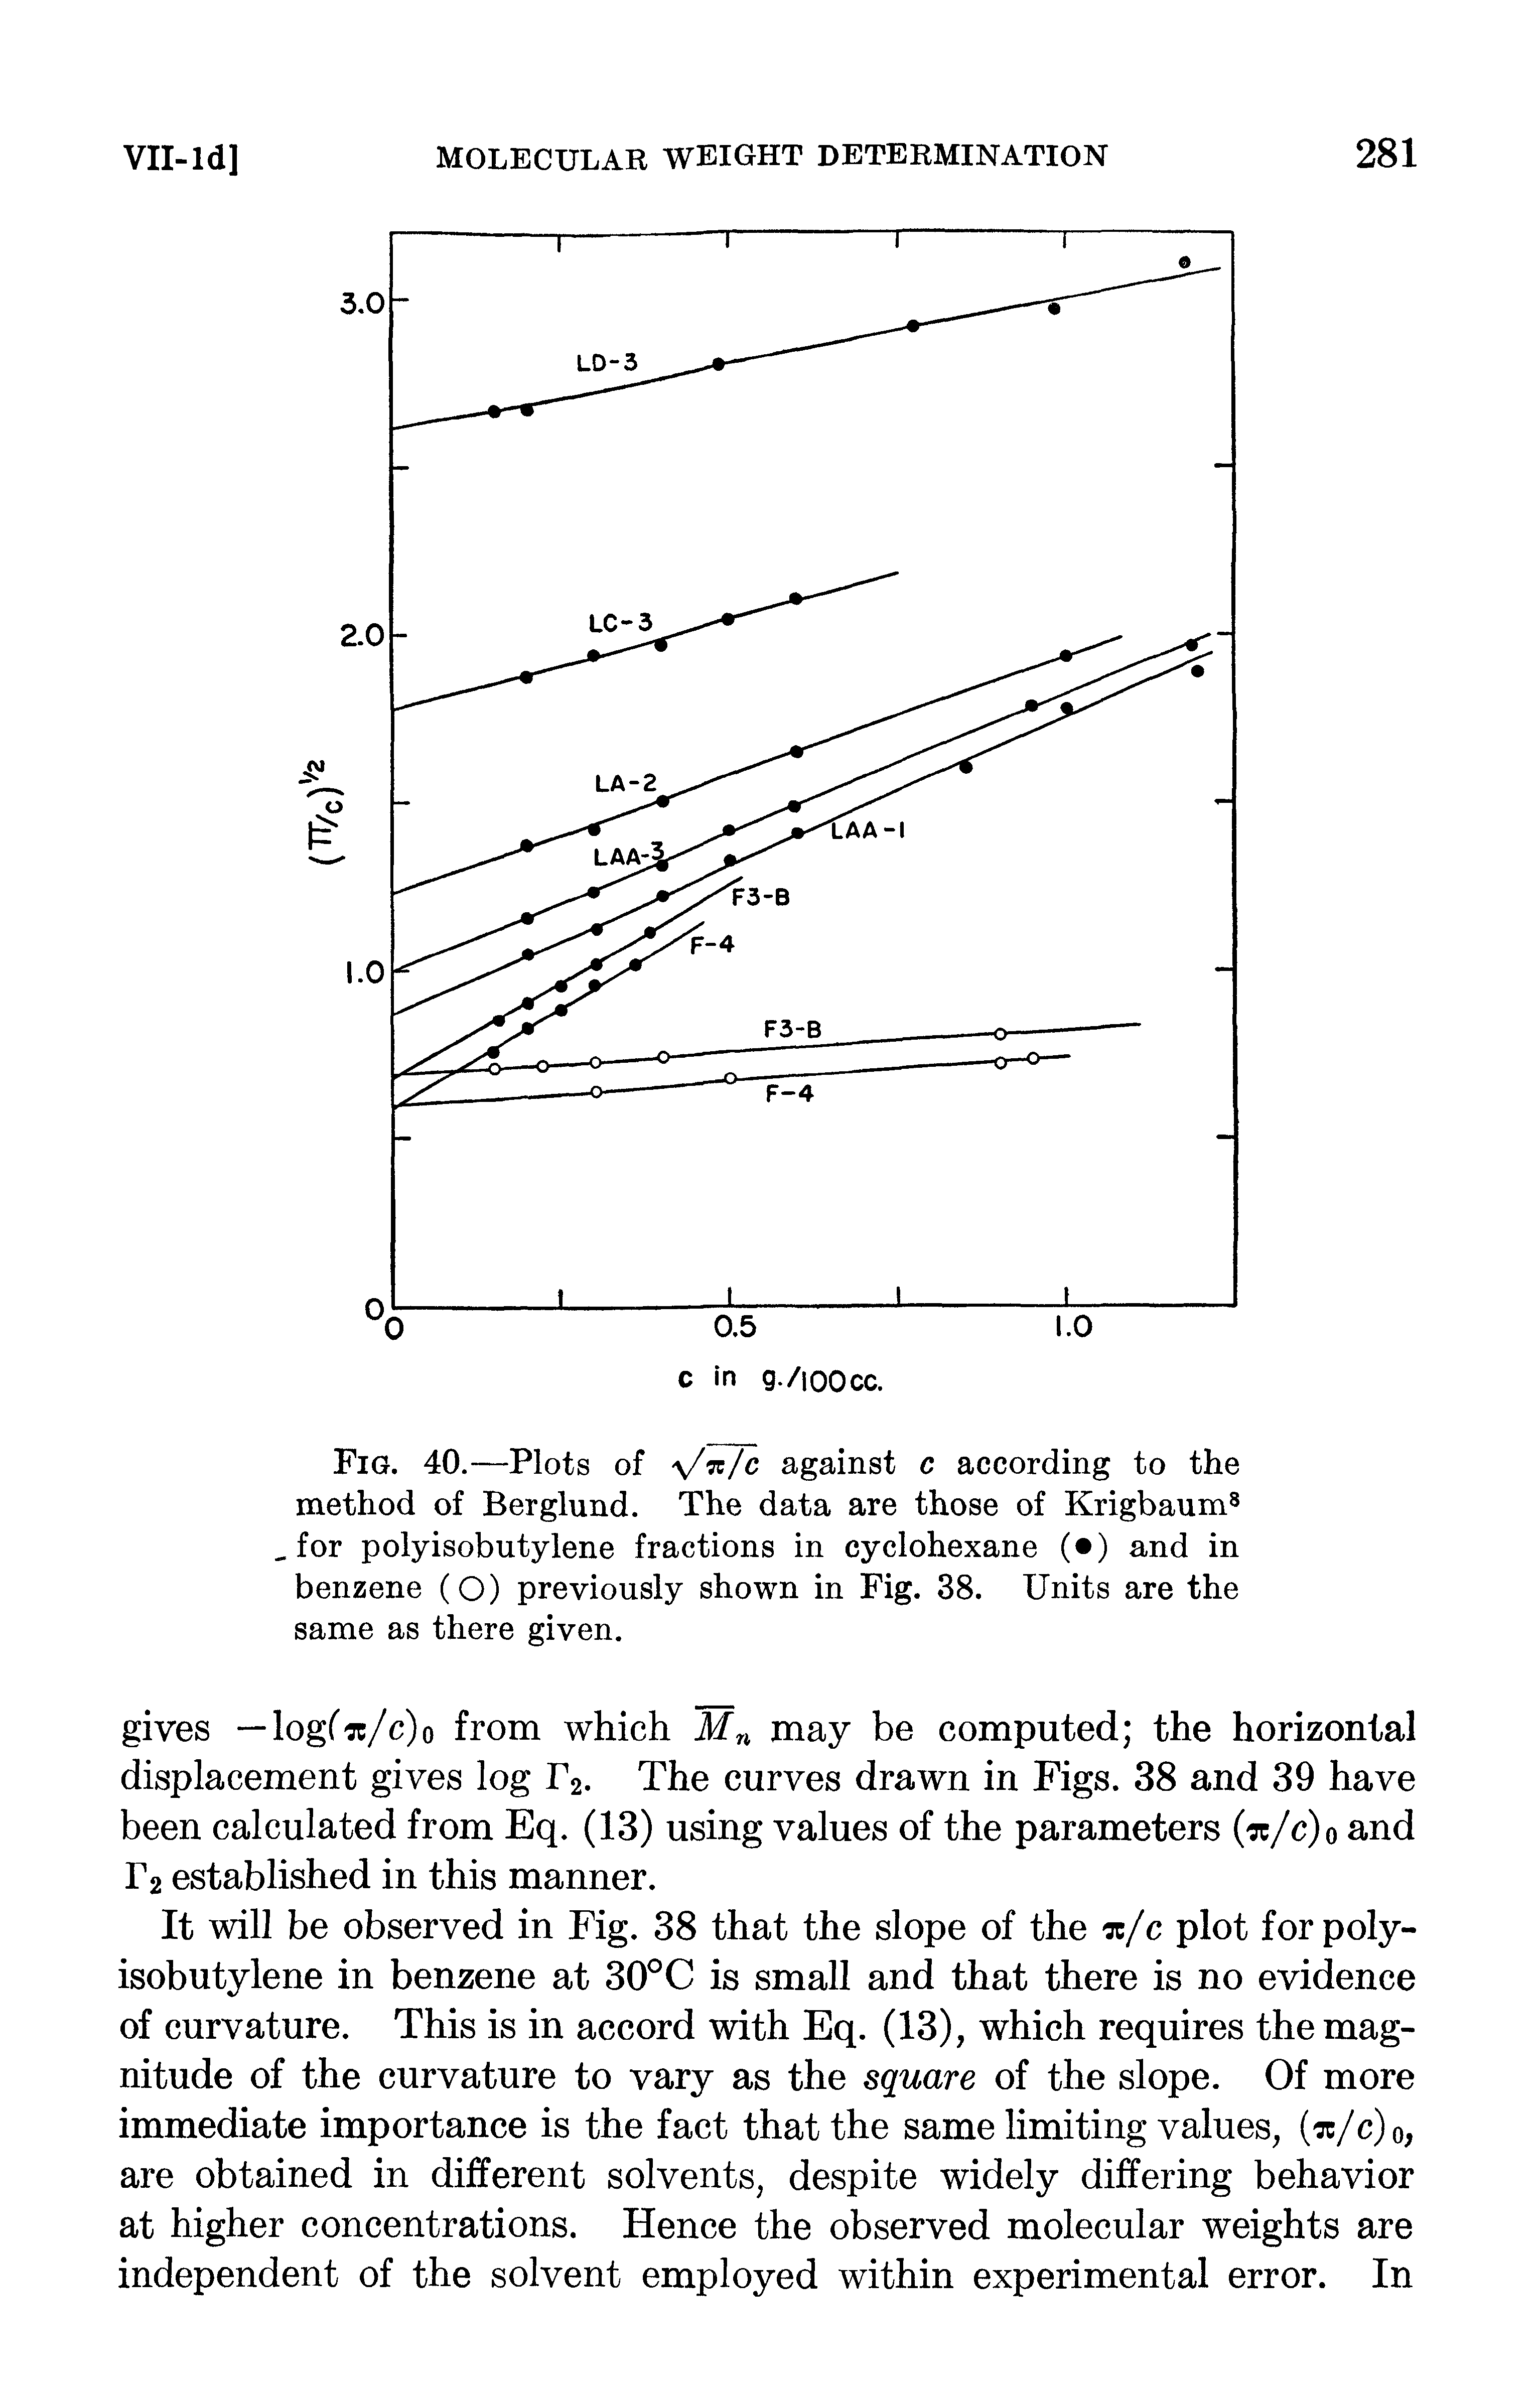 Fig. 40.—Plots of y/ /c against c according to the method of Berglund. The data are those of Krigbaum, for polyisobutylene fractions in cyclohexane ( ) and in benzene (O) previously shown in Fig. 38. Units are the same as there given.